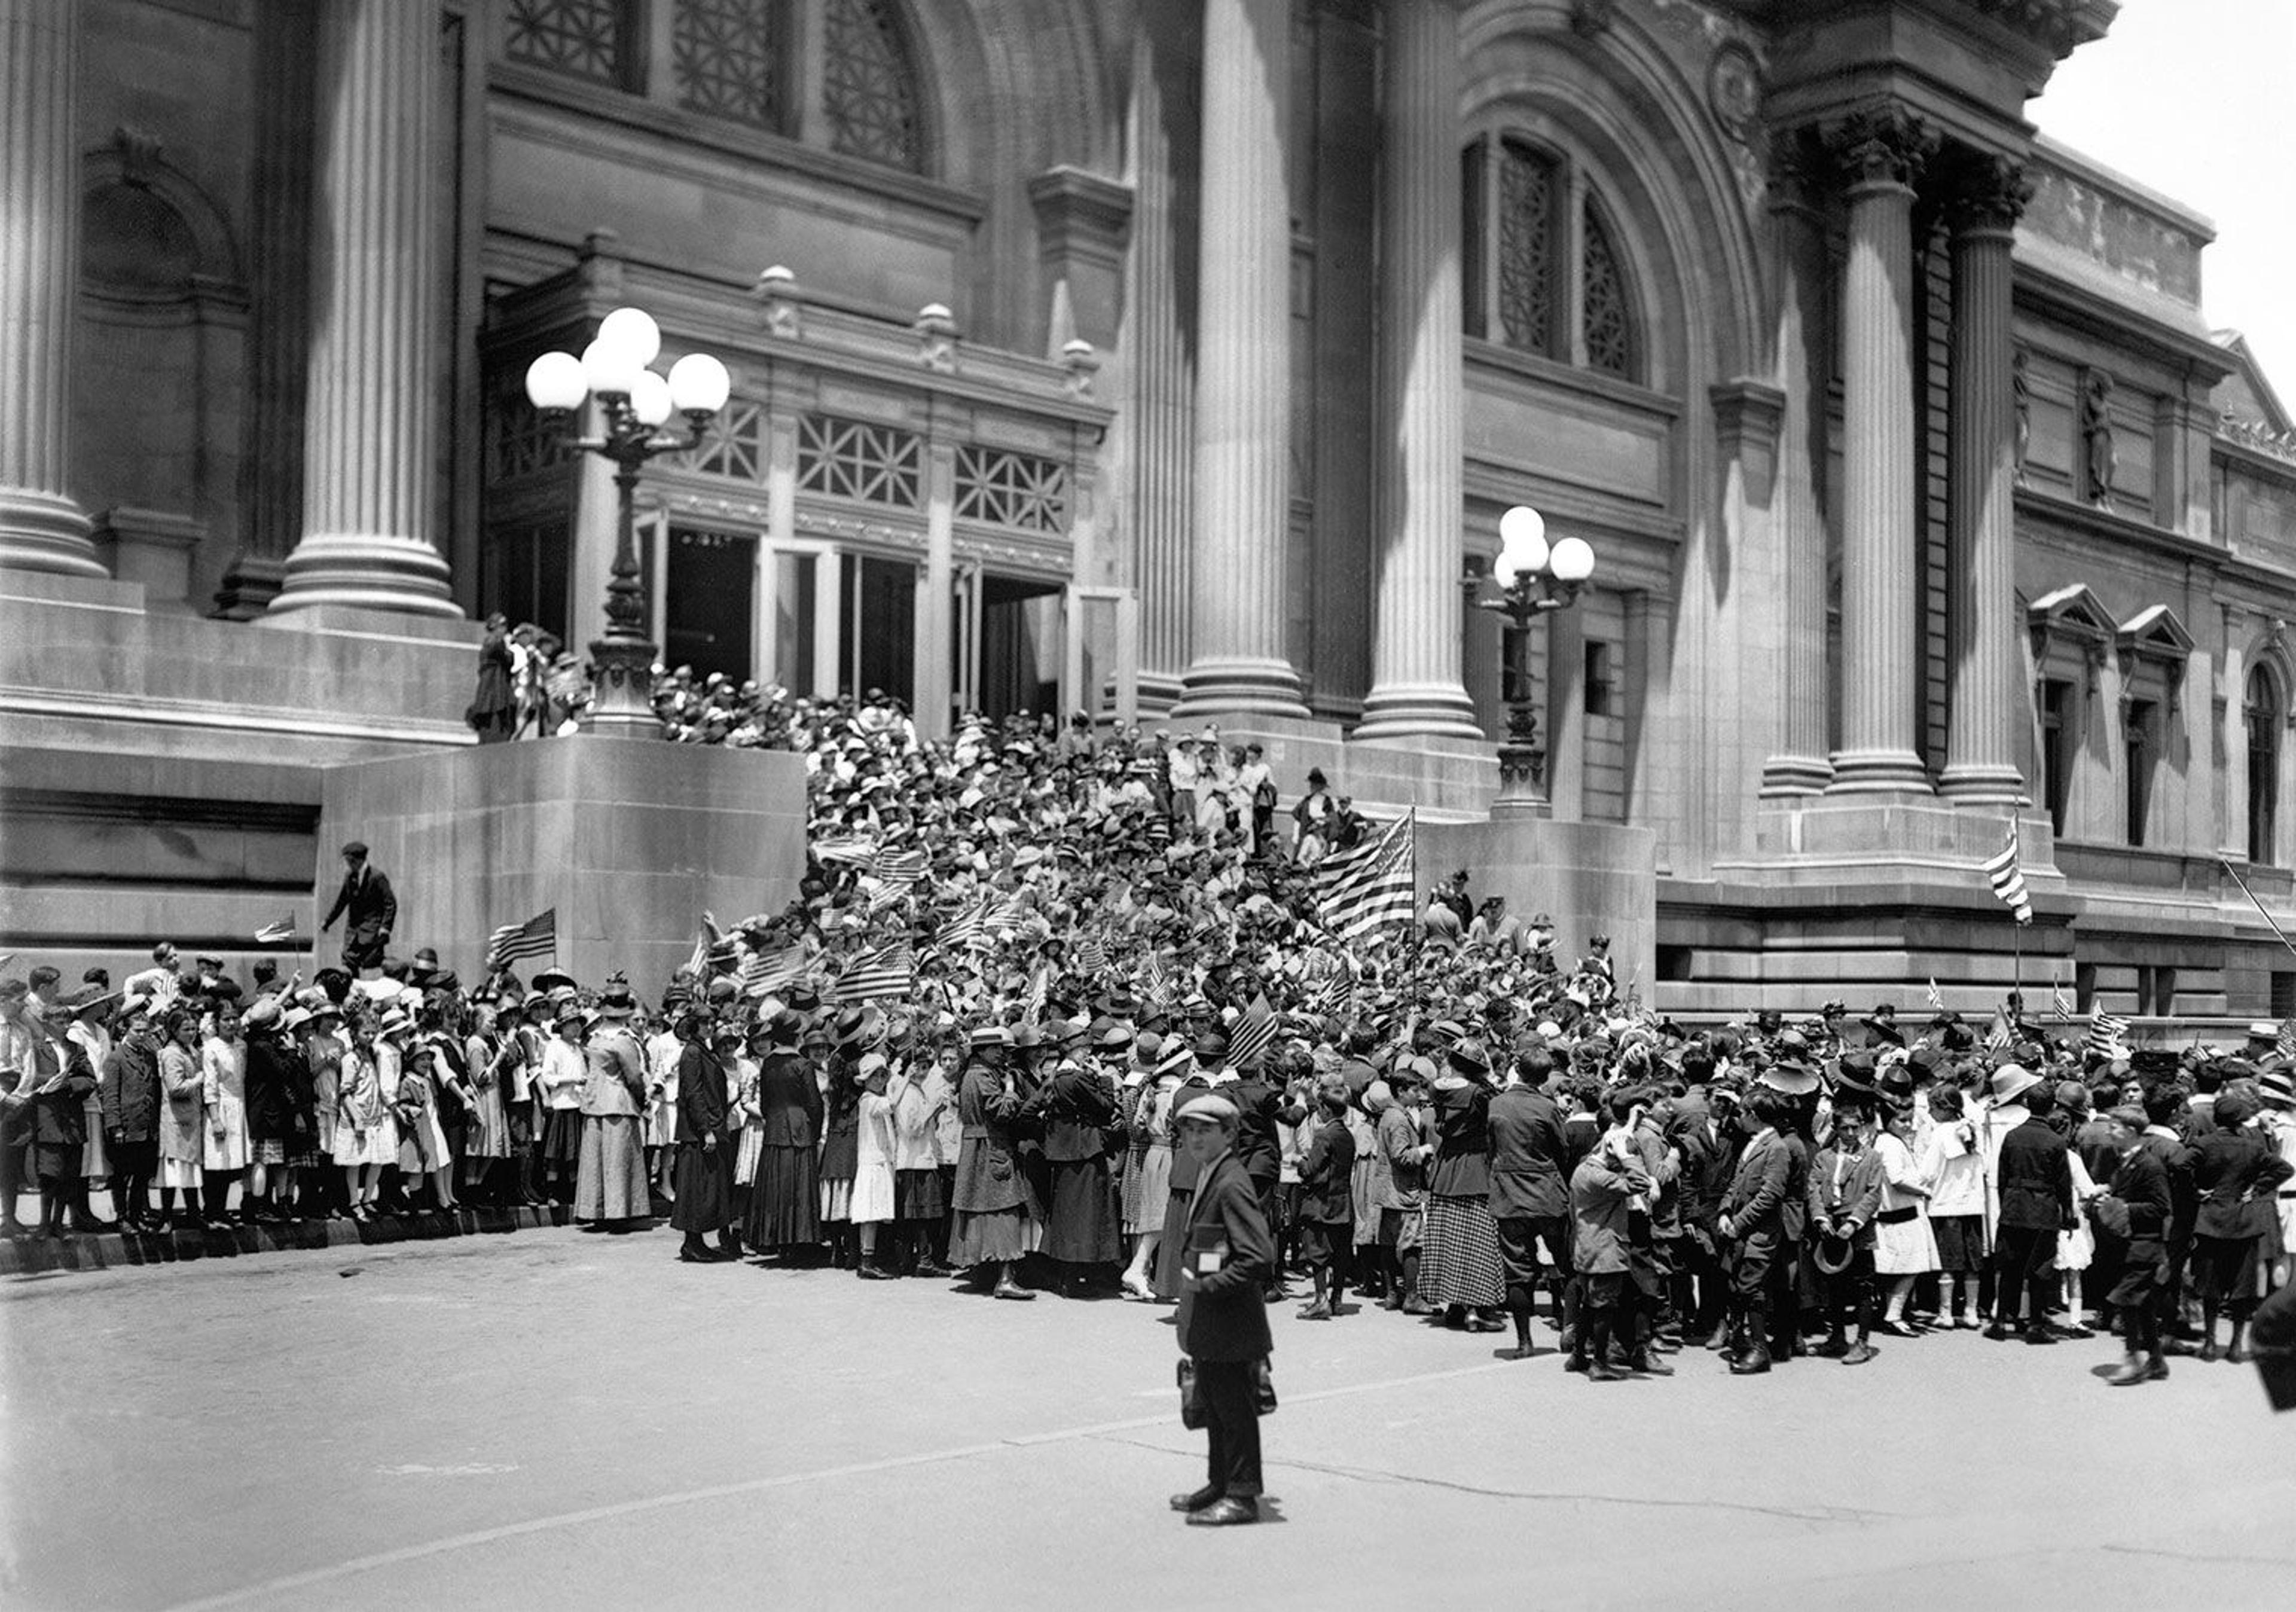 Students from Public School No. 6 celebrate flag day at The Met on June 4, 1916, in the middle of World War I.